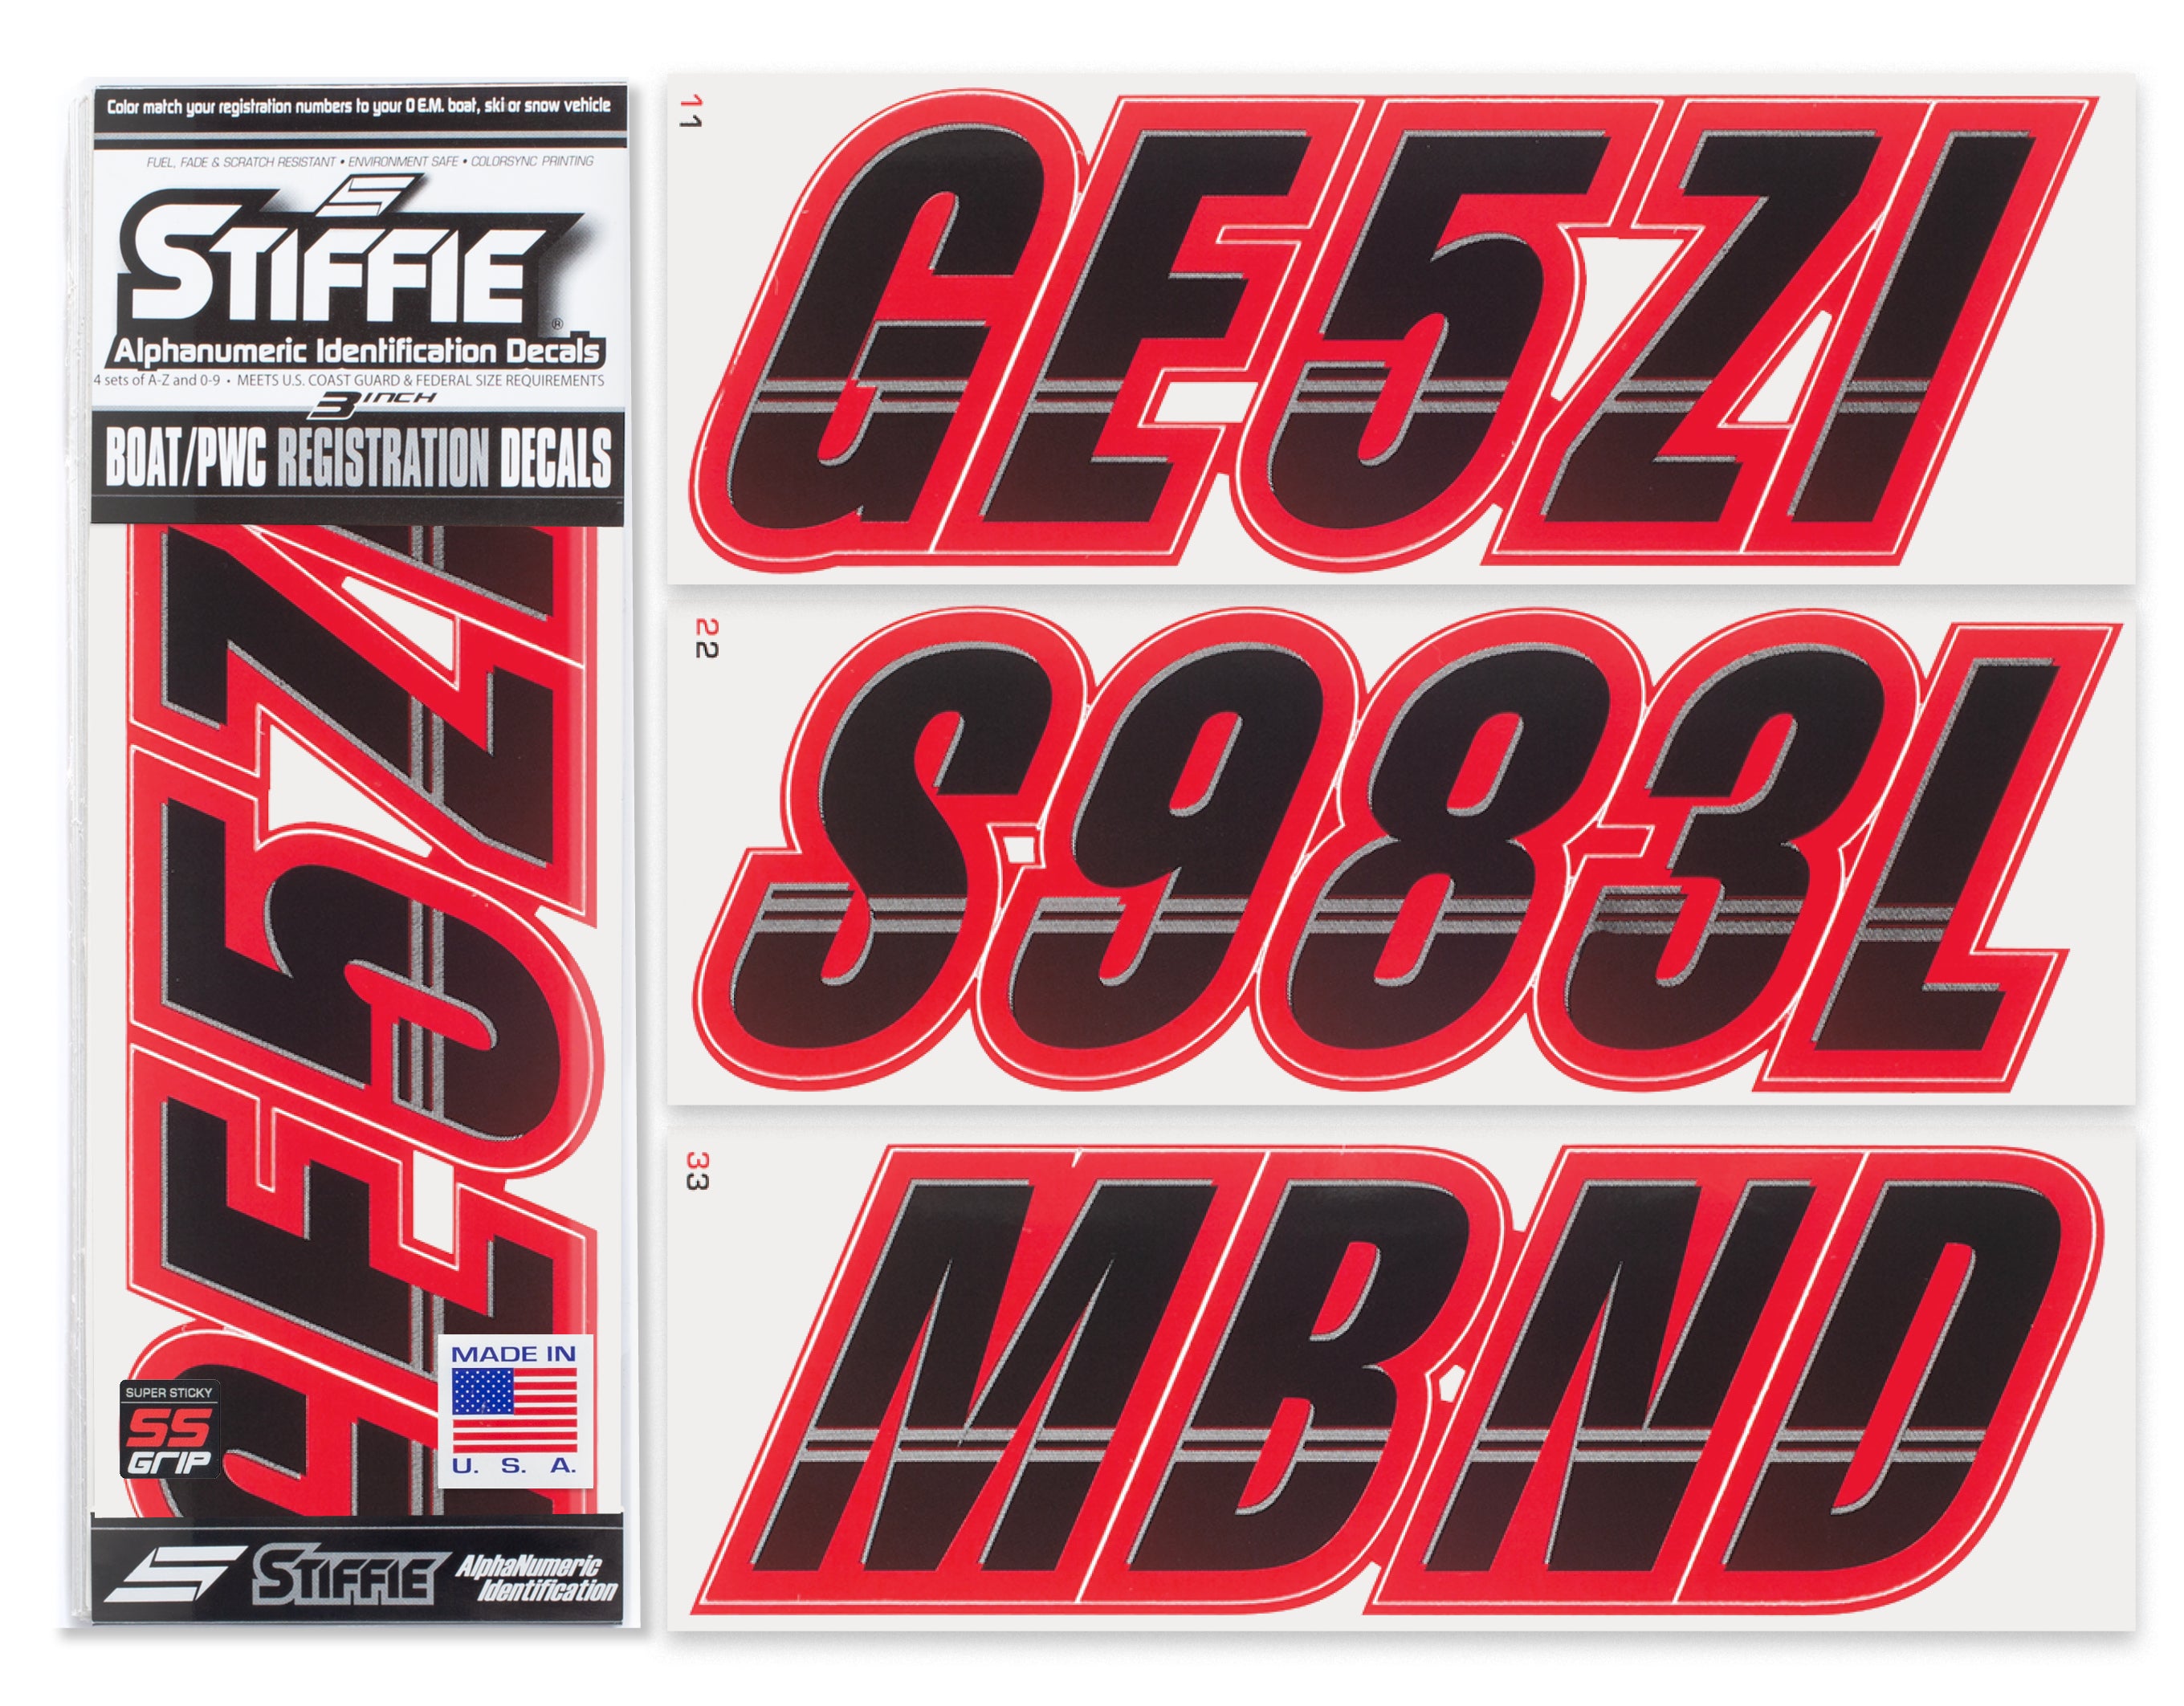 Stiffie Techtron Black/Lava Red Super Sticky 3" Alpha Numeric Registration Identification Numbers Stickers Decals for Sea-Doo Spark, Inflatable Boats, Ribs, Hypalon/PVC, PWC and Boats.